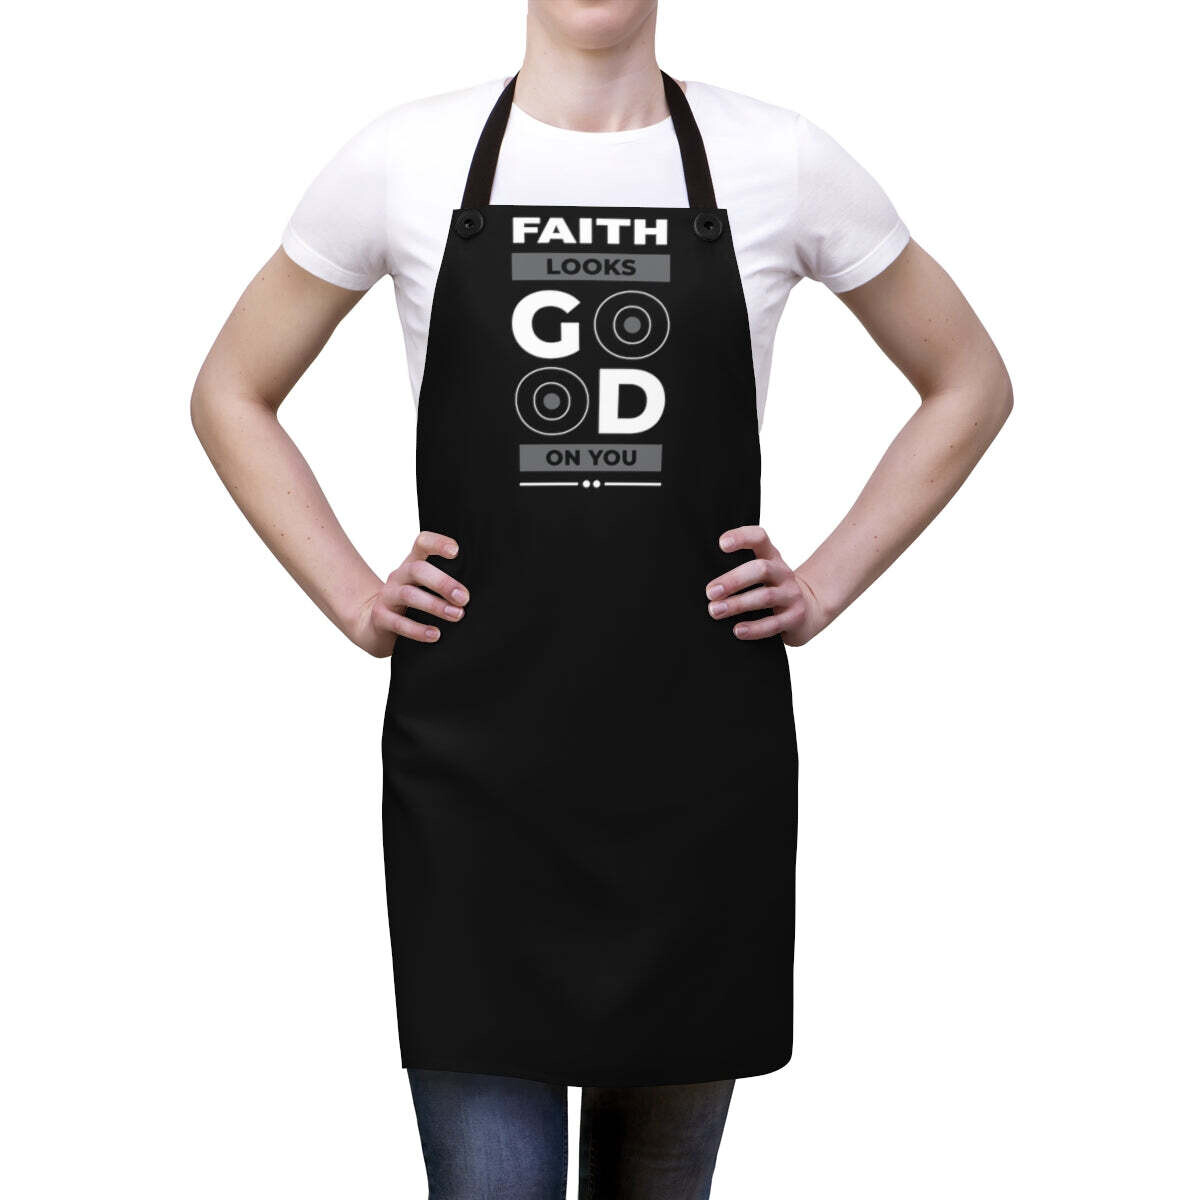 Home Accessories, Apron for Cooking or Cleaning, Faith Looks Good On You, Christian Inspiration